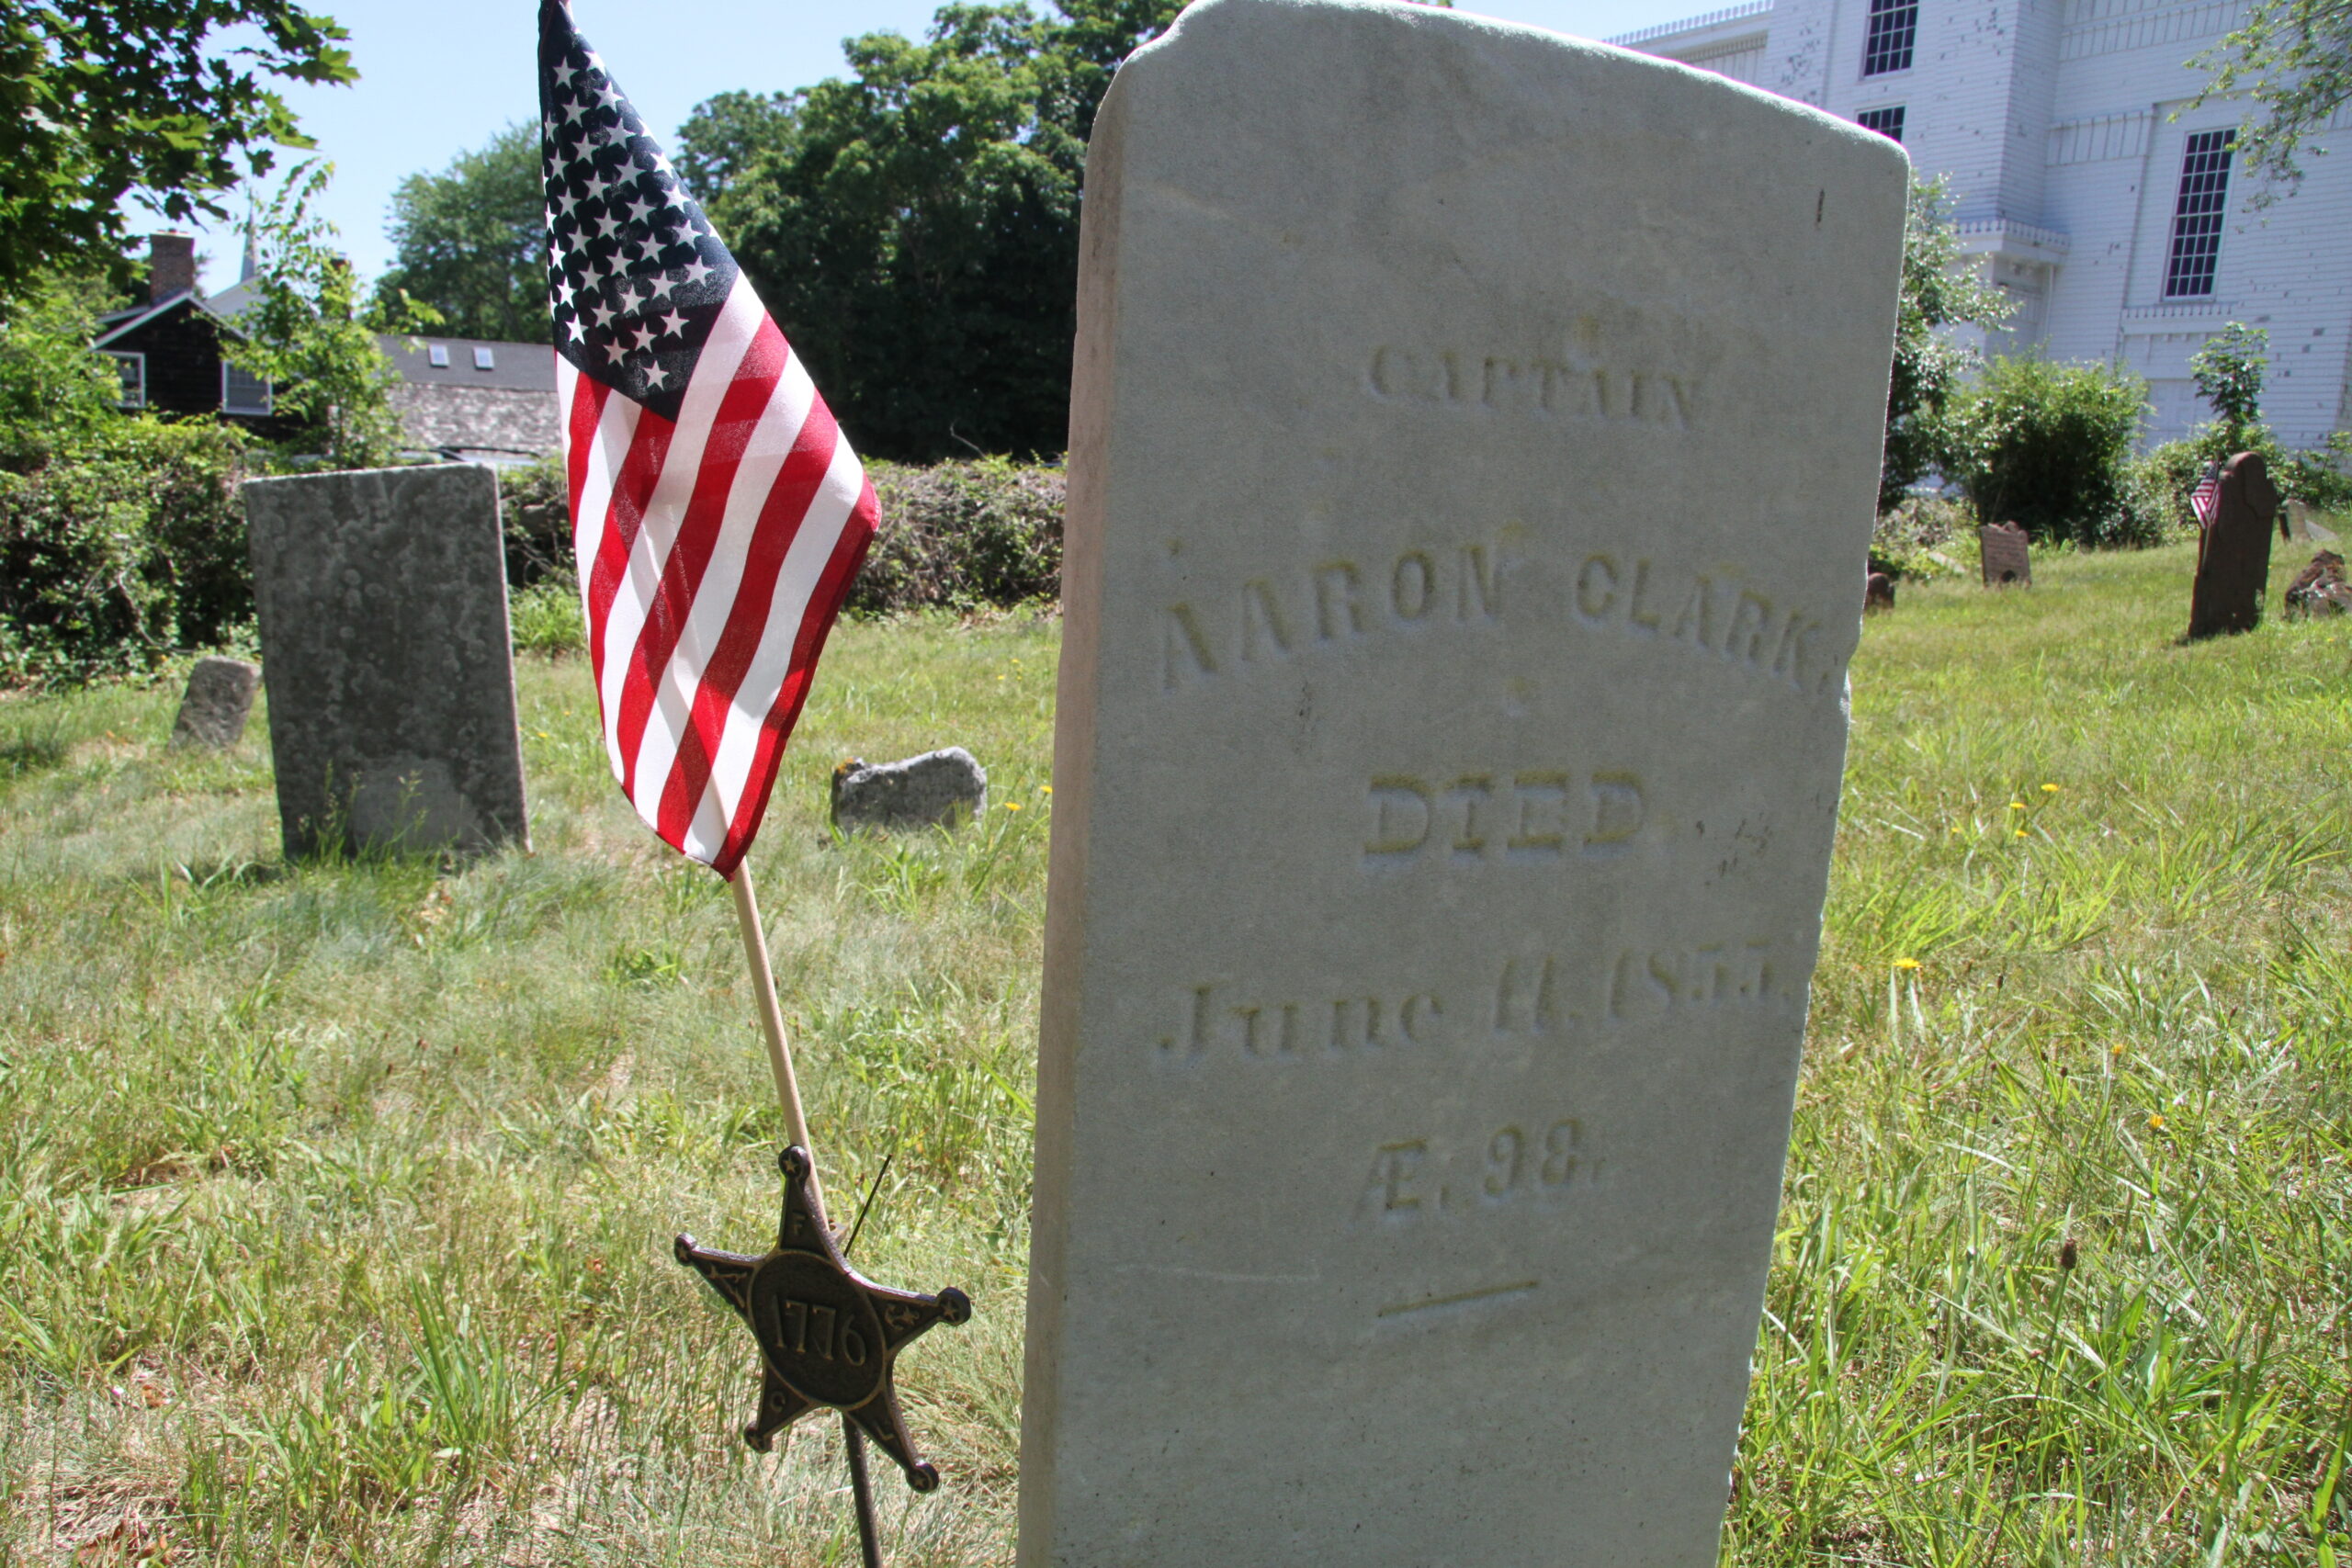 One of the 22 graves of confirmed patriots buried at the Old Burying Ground in Sag Harbor.